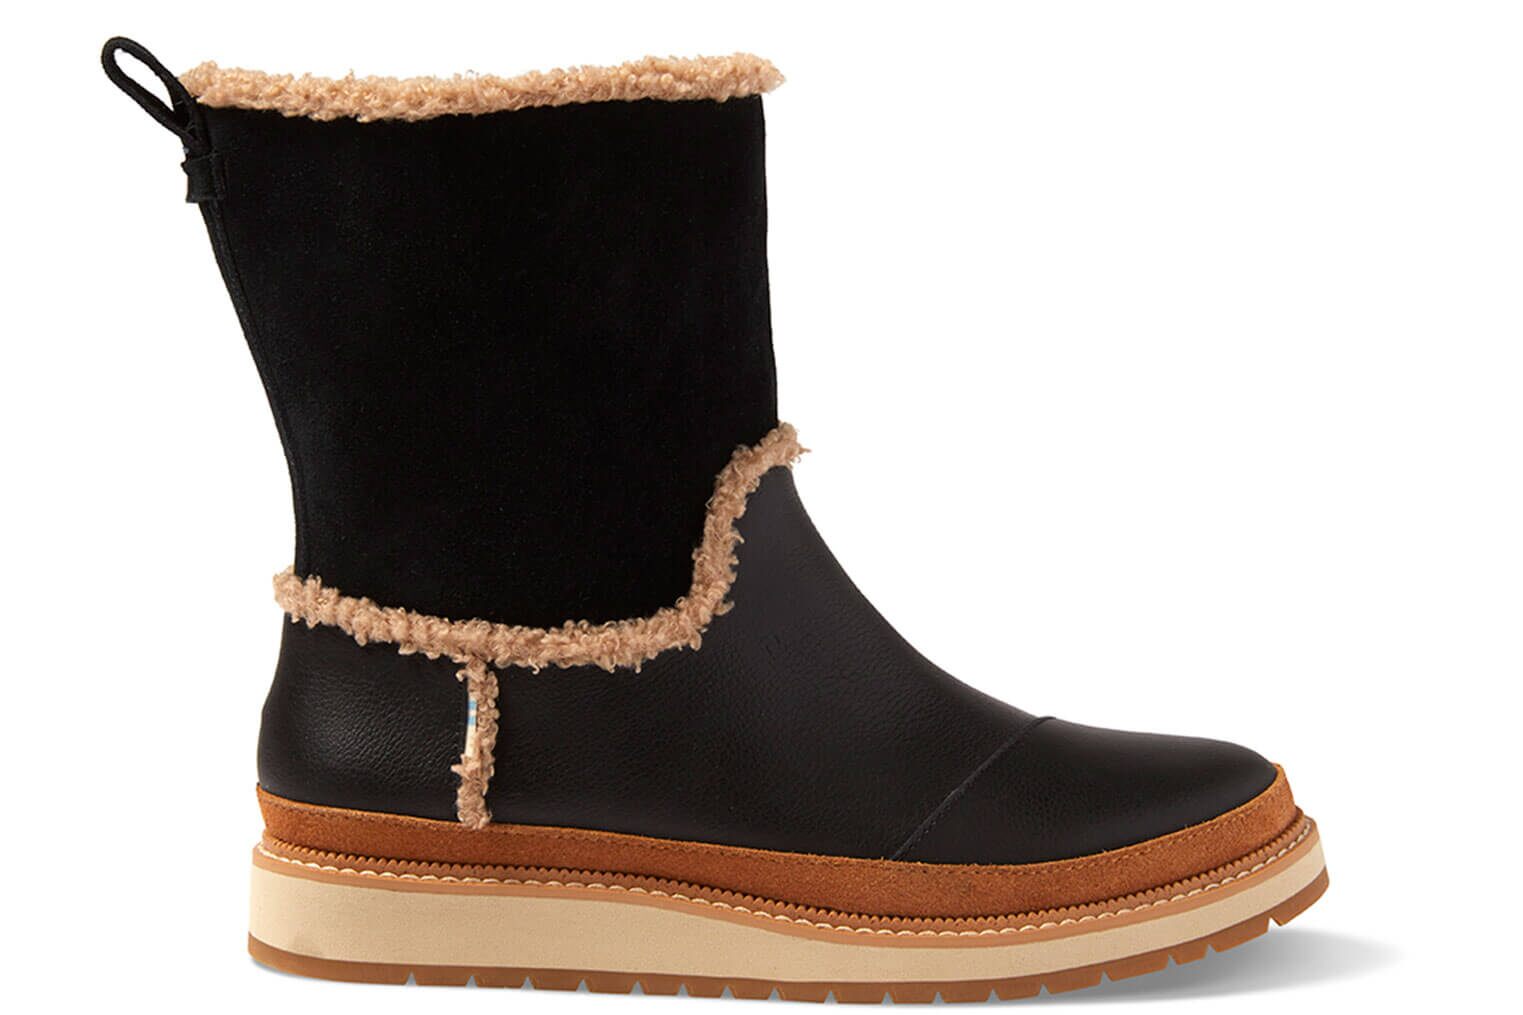 Makenna Black Leather Suede Boots 